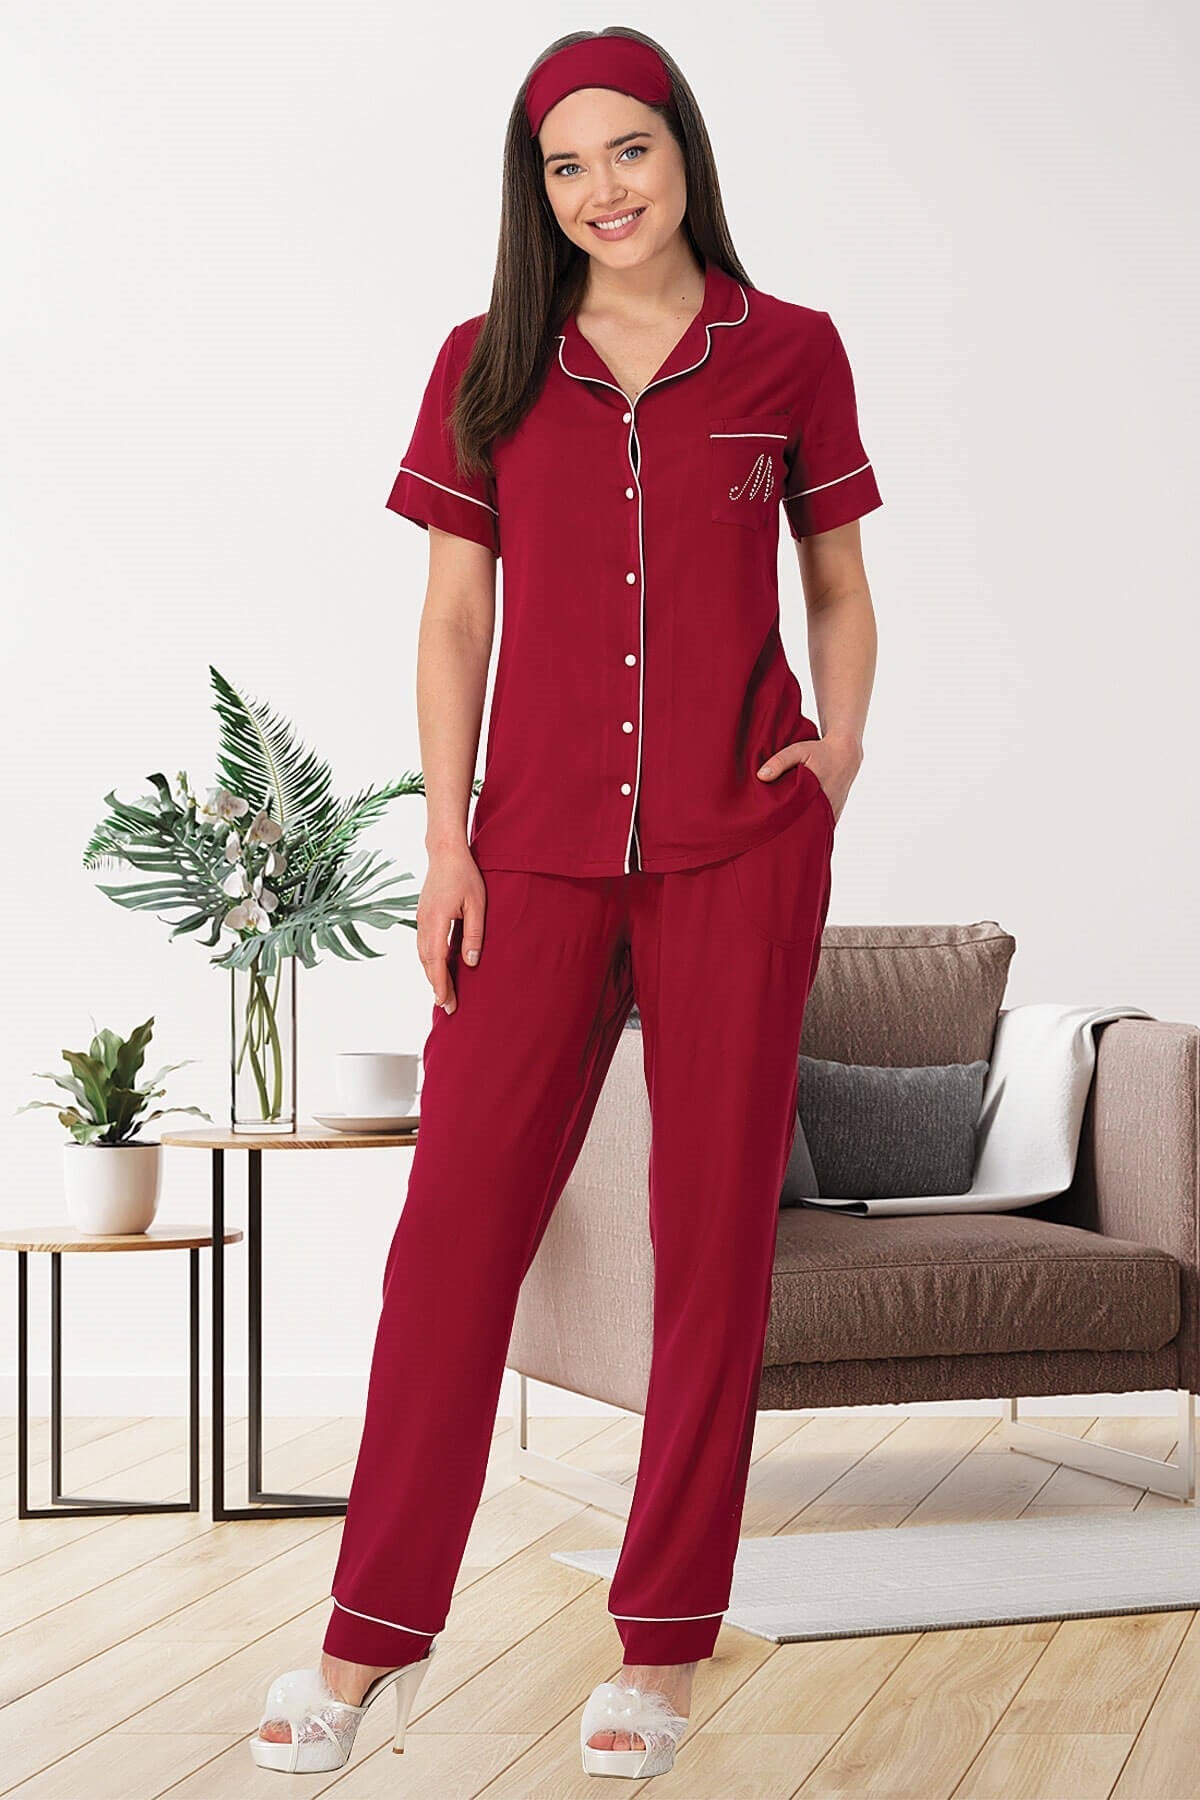 Shopymommy 5482 Woven Front Button Maternity & Nursing Pajamas